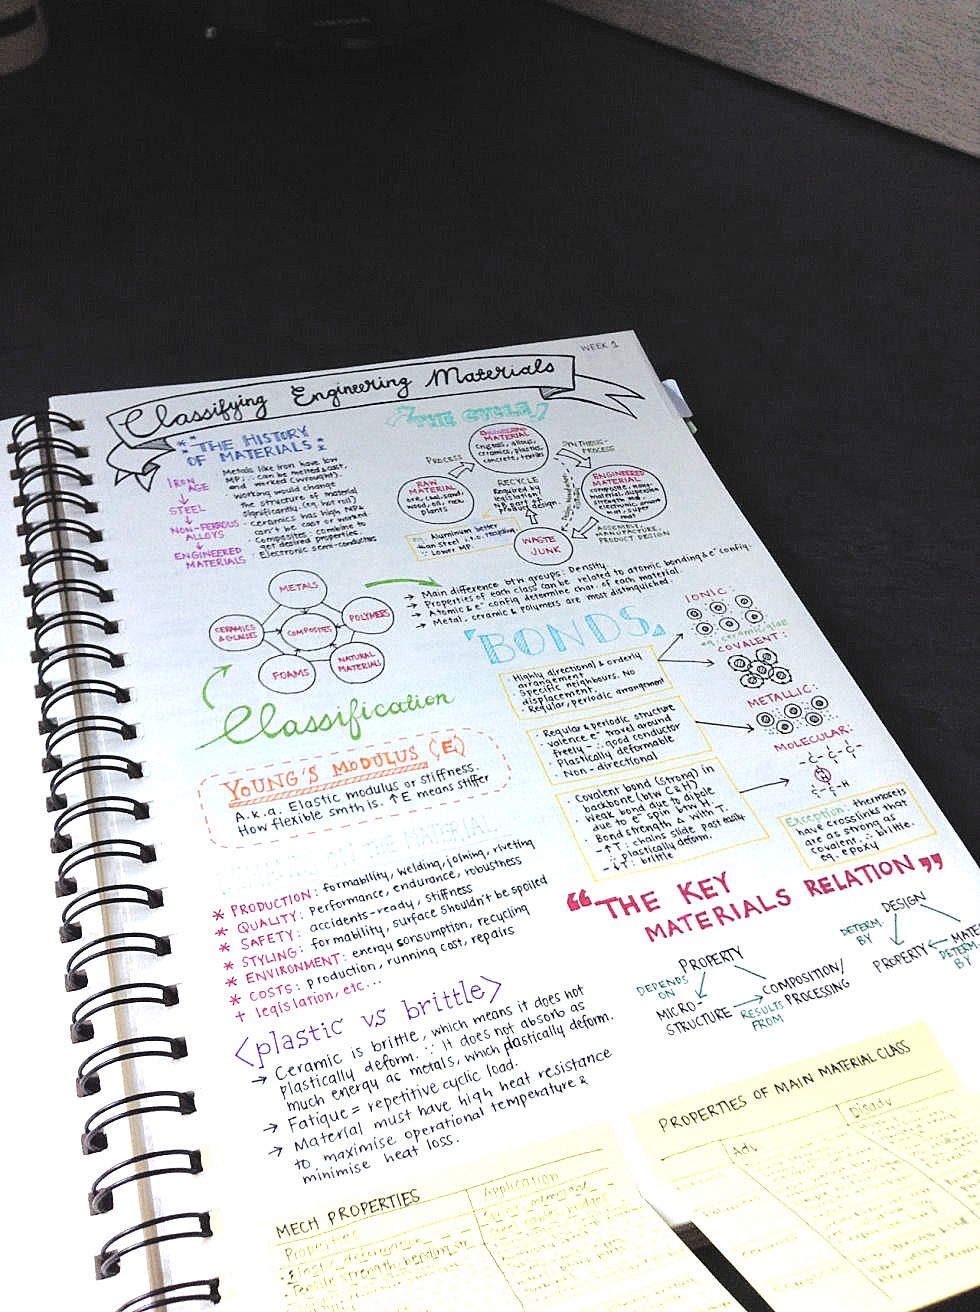 8 Pretty Pictures Of Class Notes That Will Inspire You To